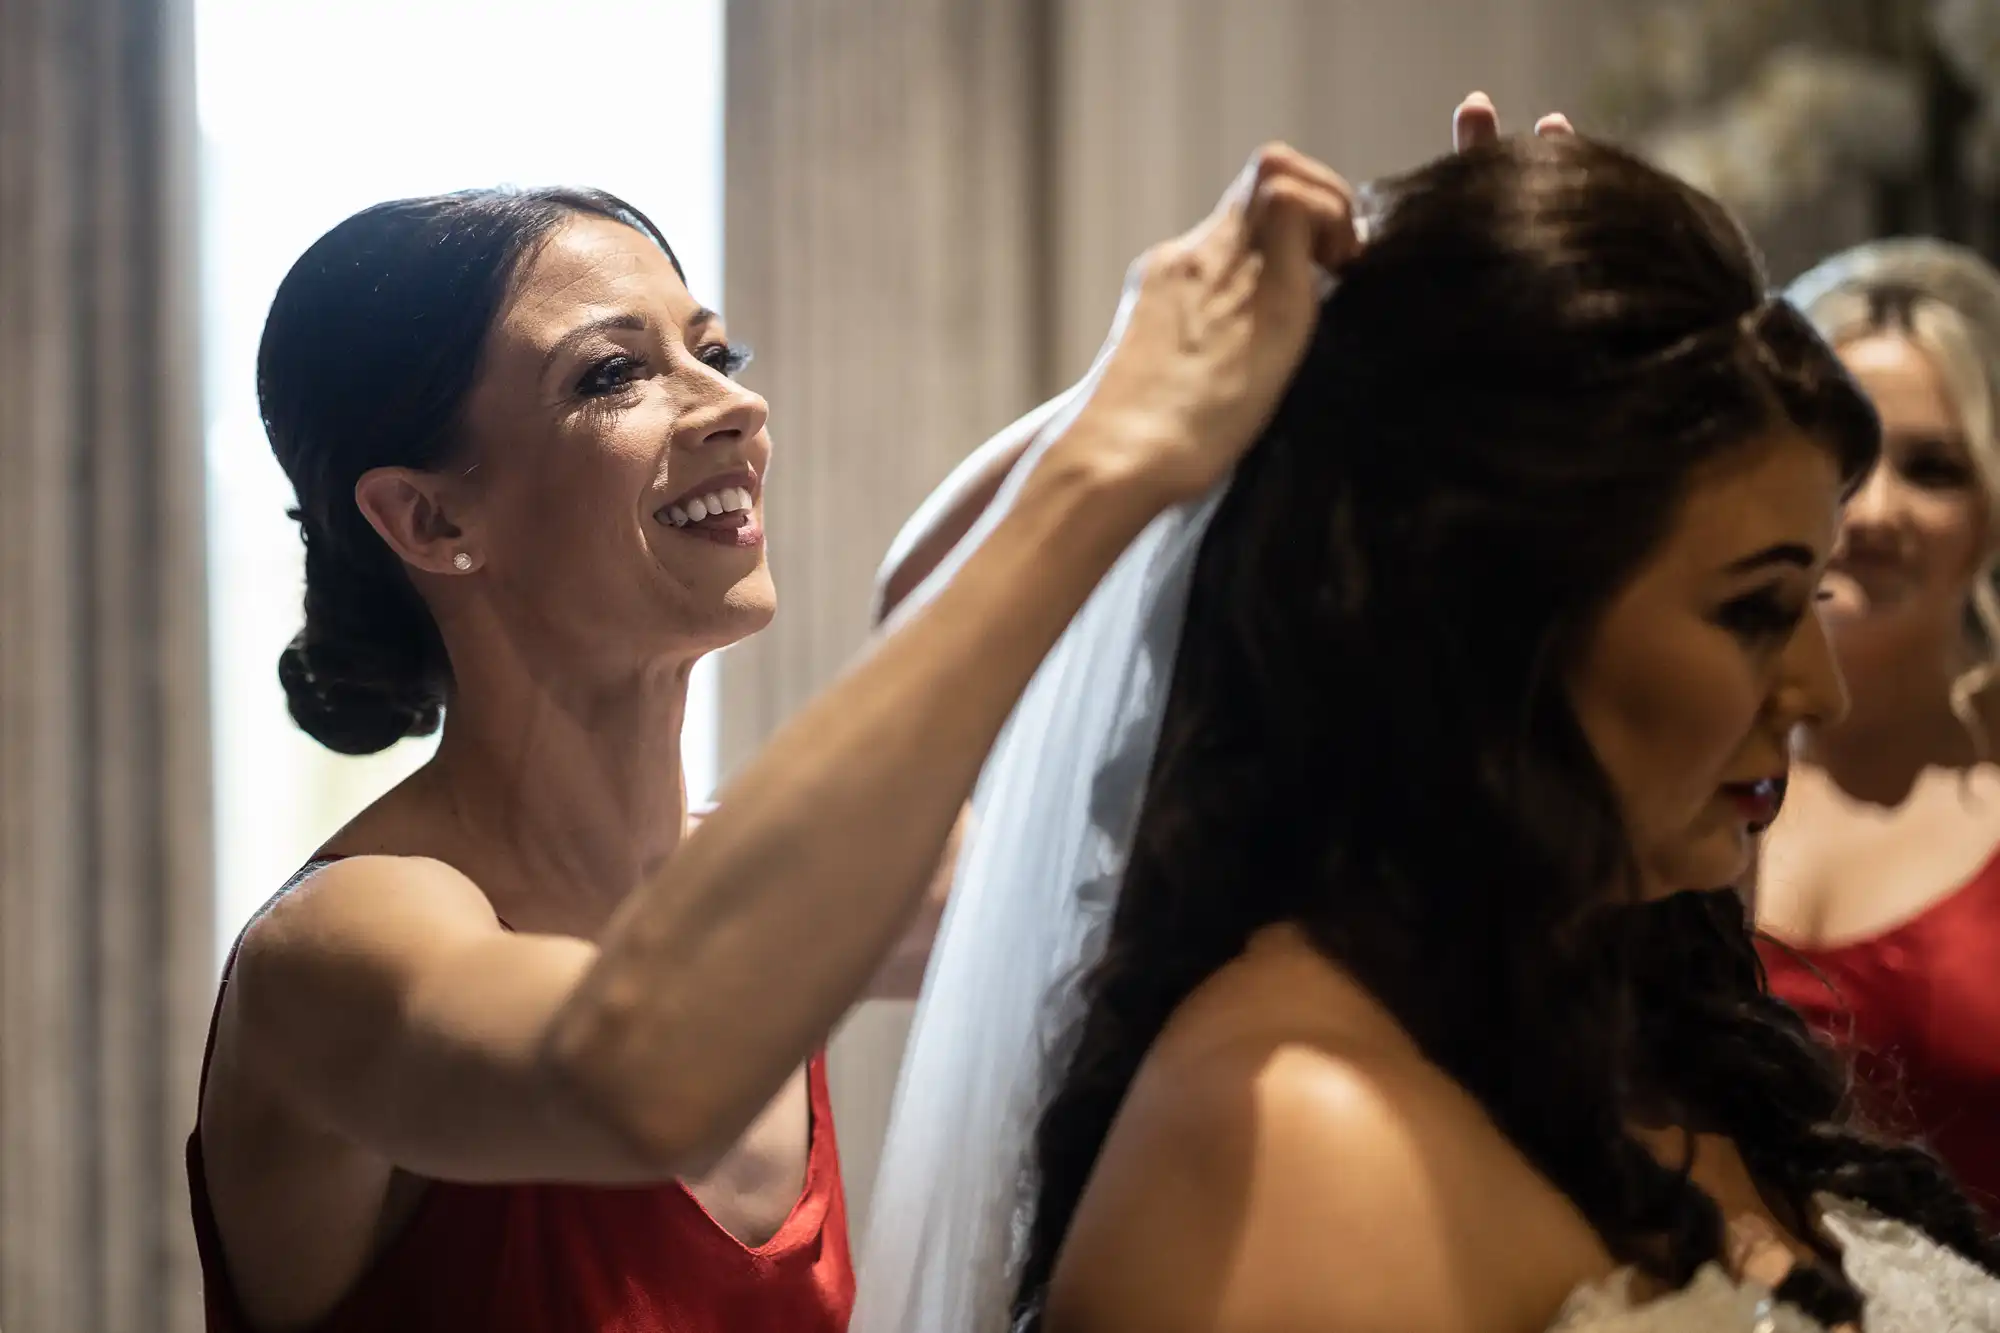 A woman in a red dress helps another woman adjust her wedding veil while another woman looks on.